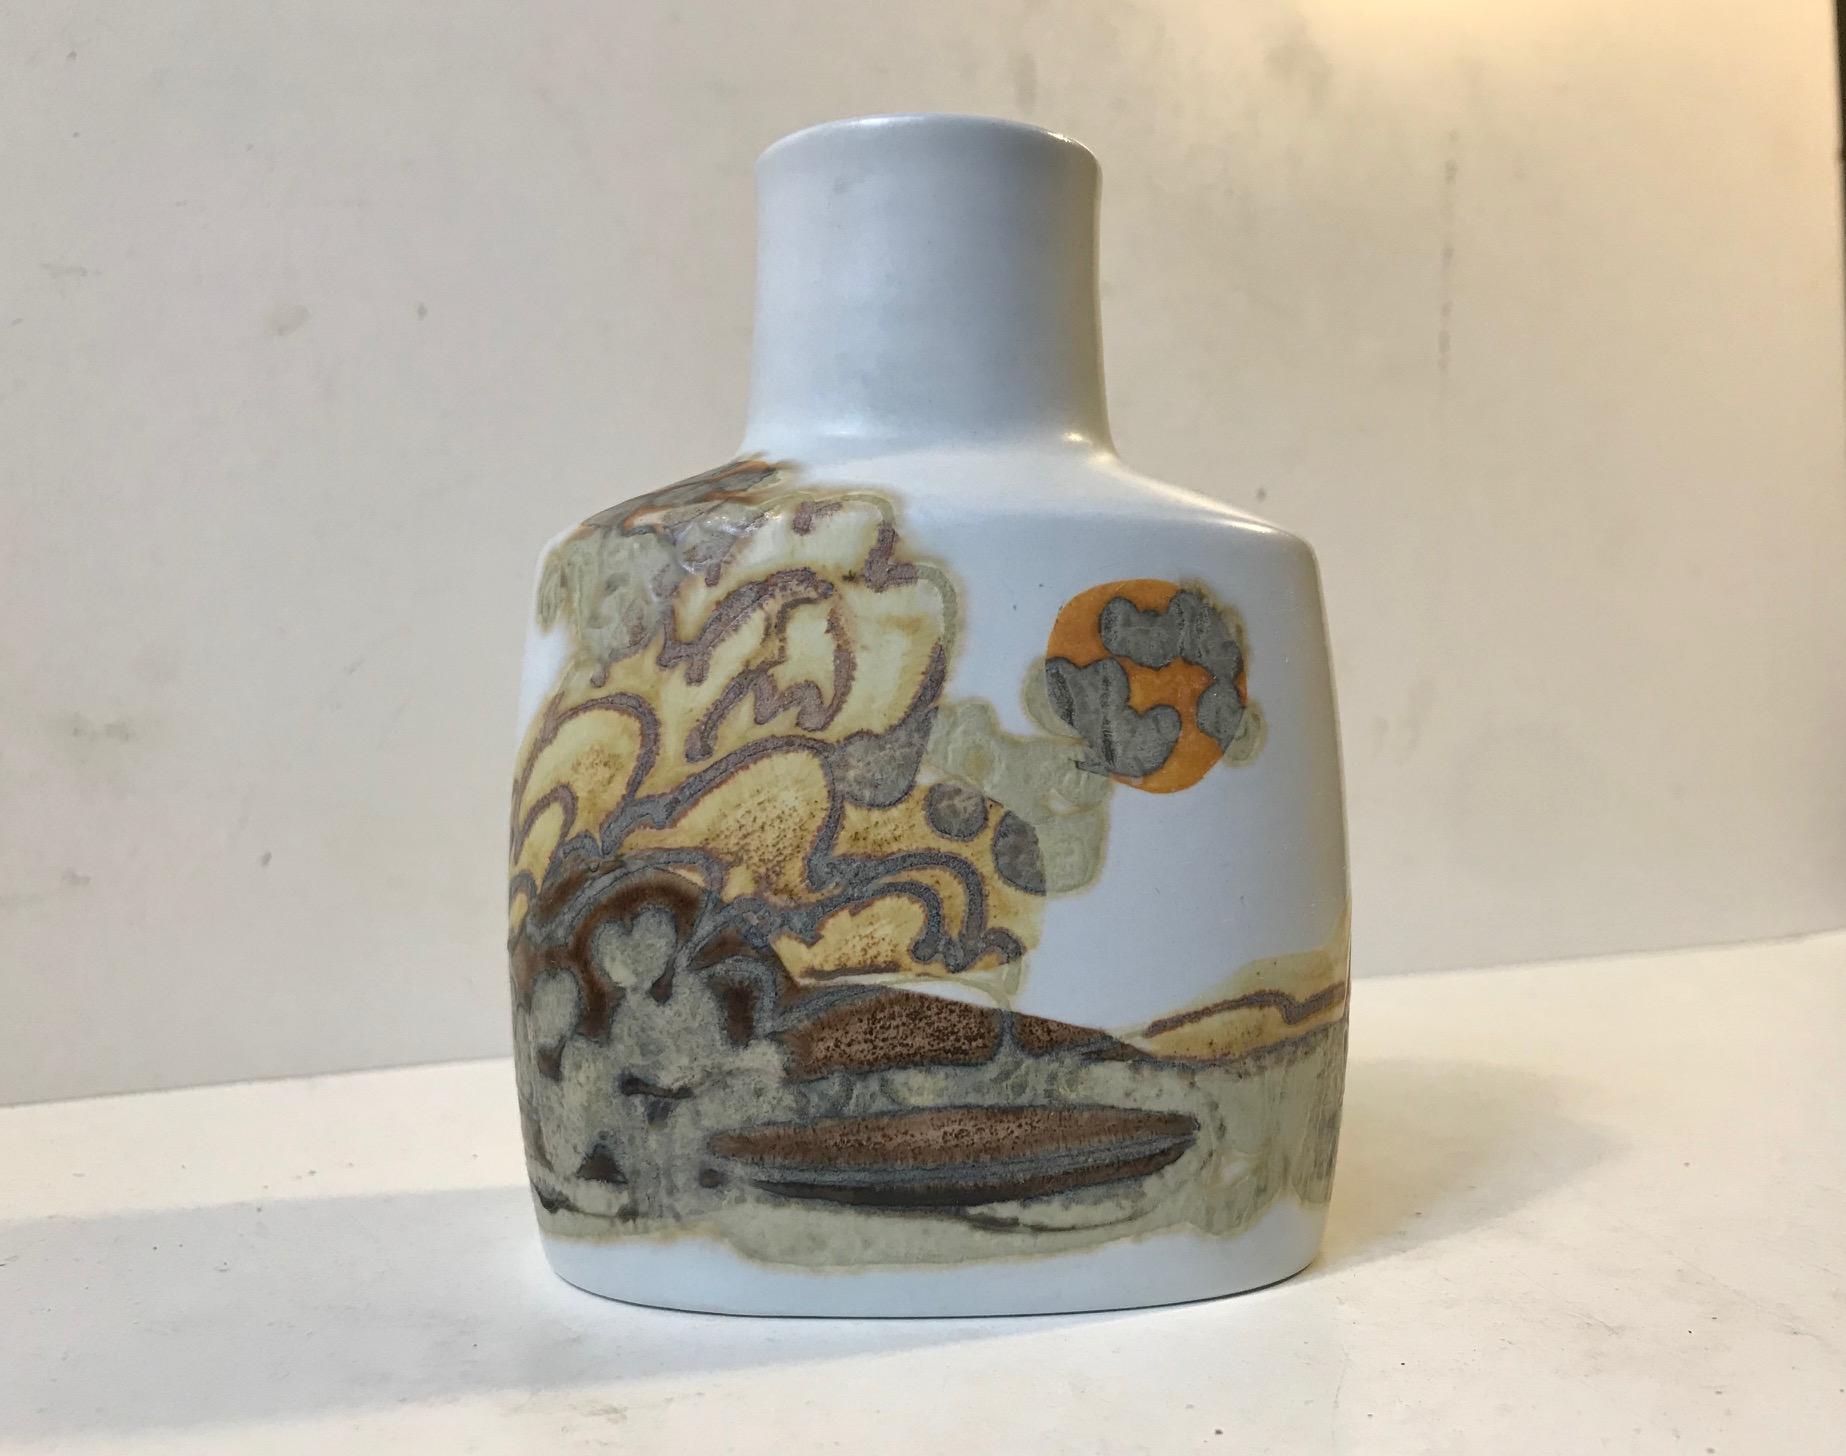 Faience vase with glazed abstract - modernistic motif in contrasting glazes. Designed by the Danish ceramist Ellen Malmer (EM) and manufactured by Royal Copenhagen during the 1970s. Fully signed, numbered and marked to the base.